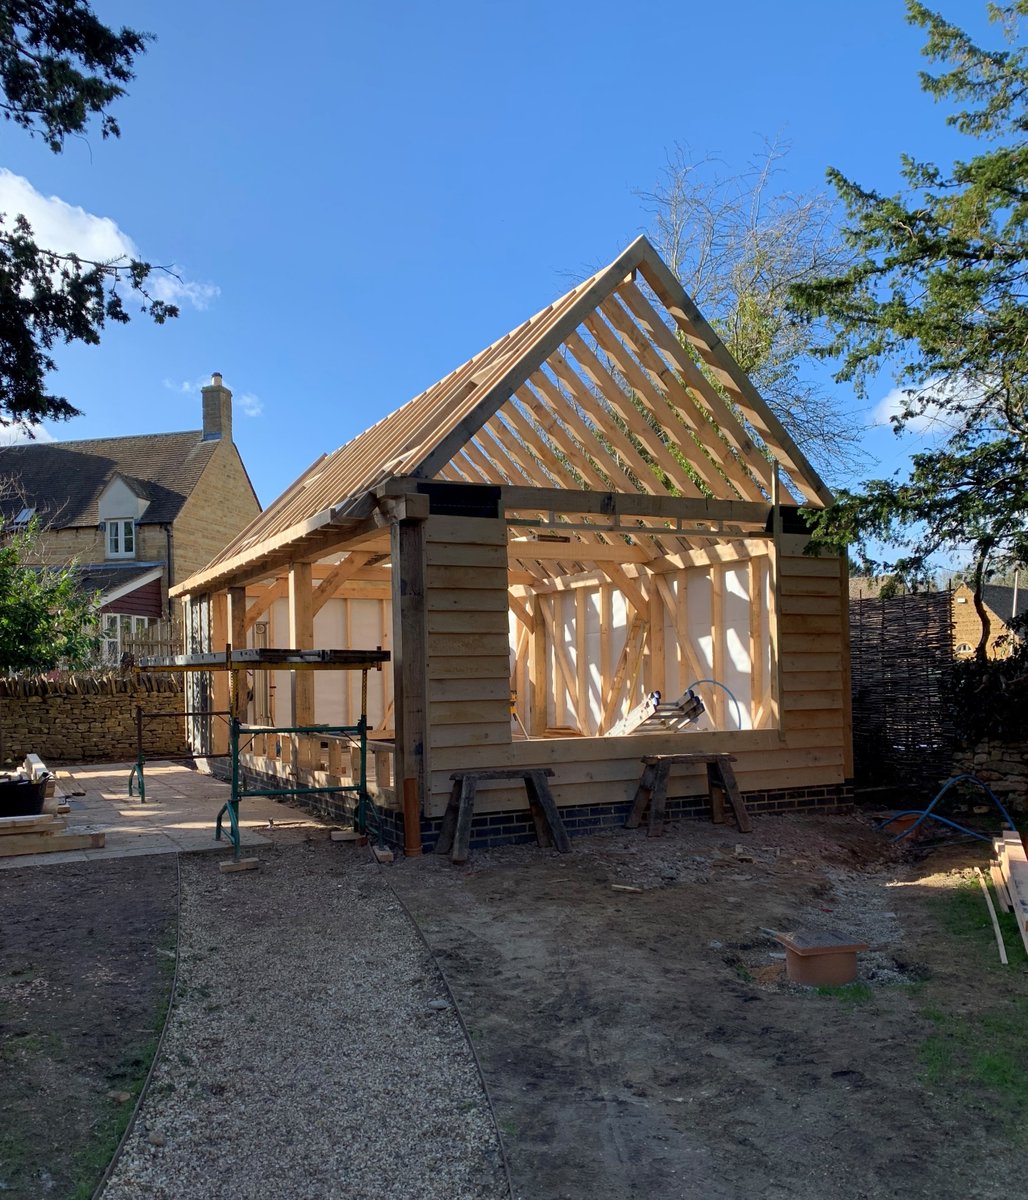 First Fix complete for this Oak Annexe ✔️ Who can't wait to see the final look? 👀

#oakframing #homerenovation #homereno #annex #annexe #outbuilding #guestroom #guestaccommodation #timberframe #homeextension #oakextension